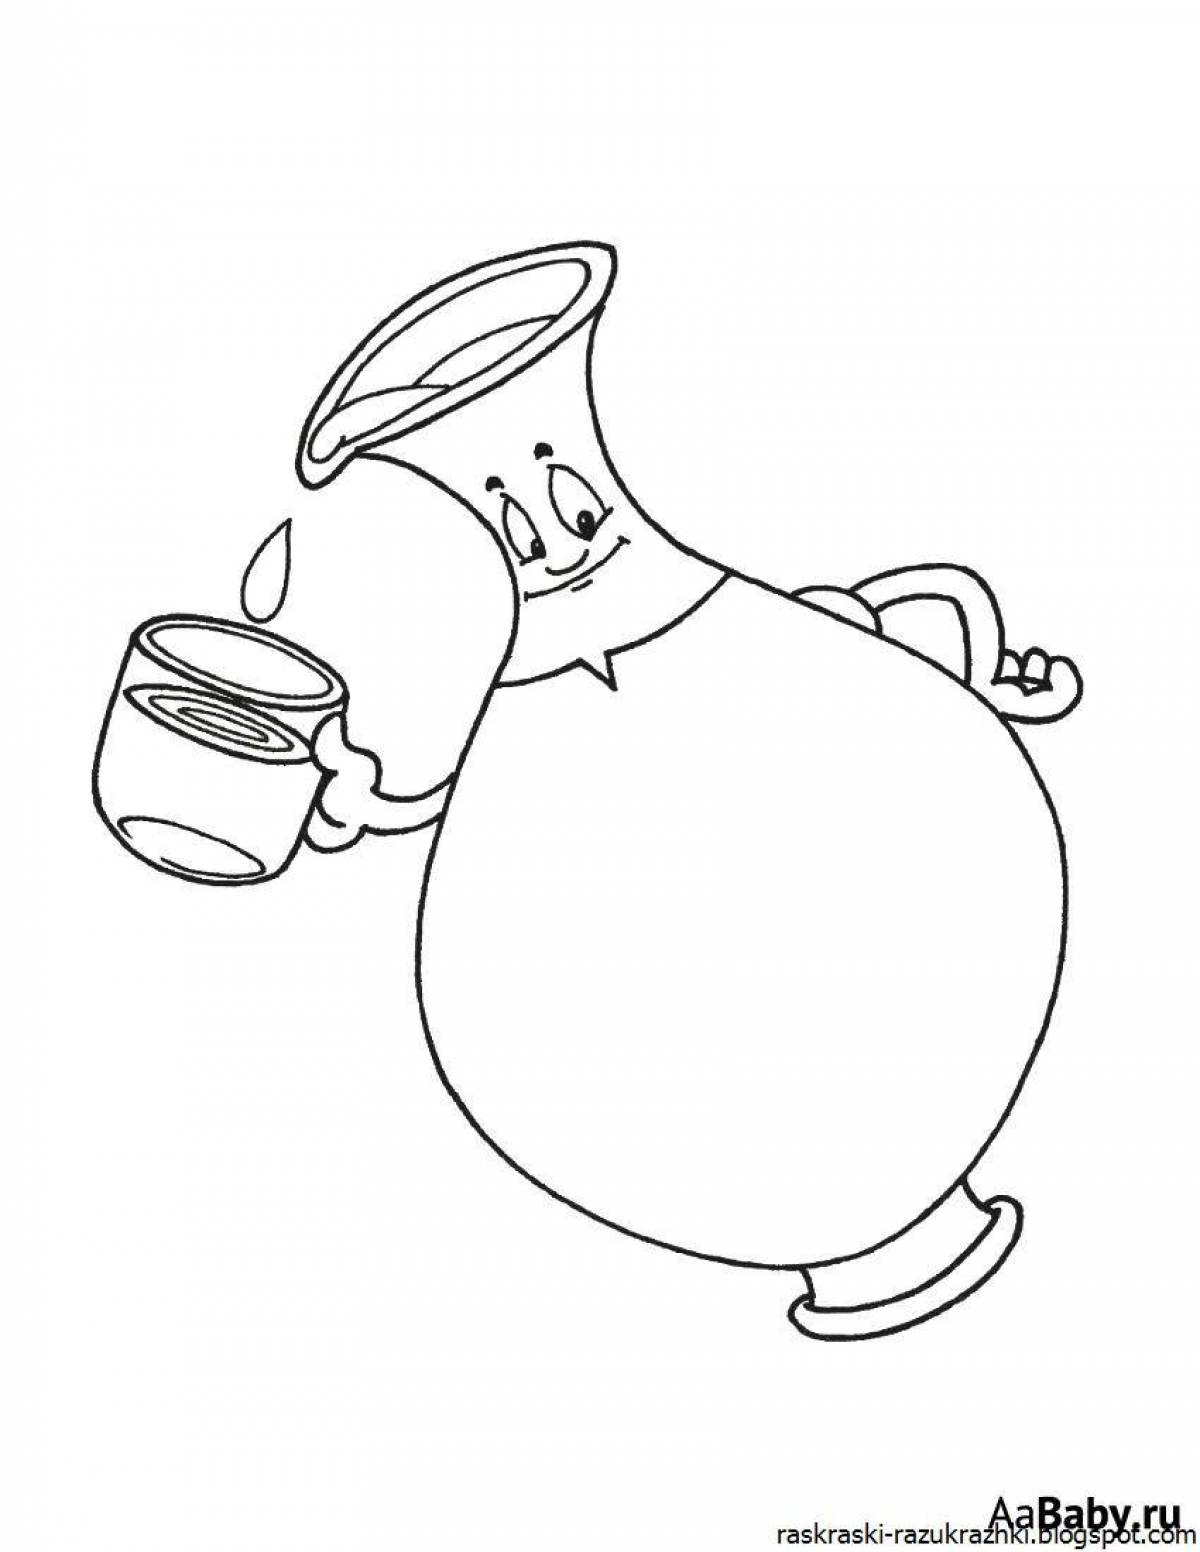 Colorful jar coloring page